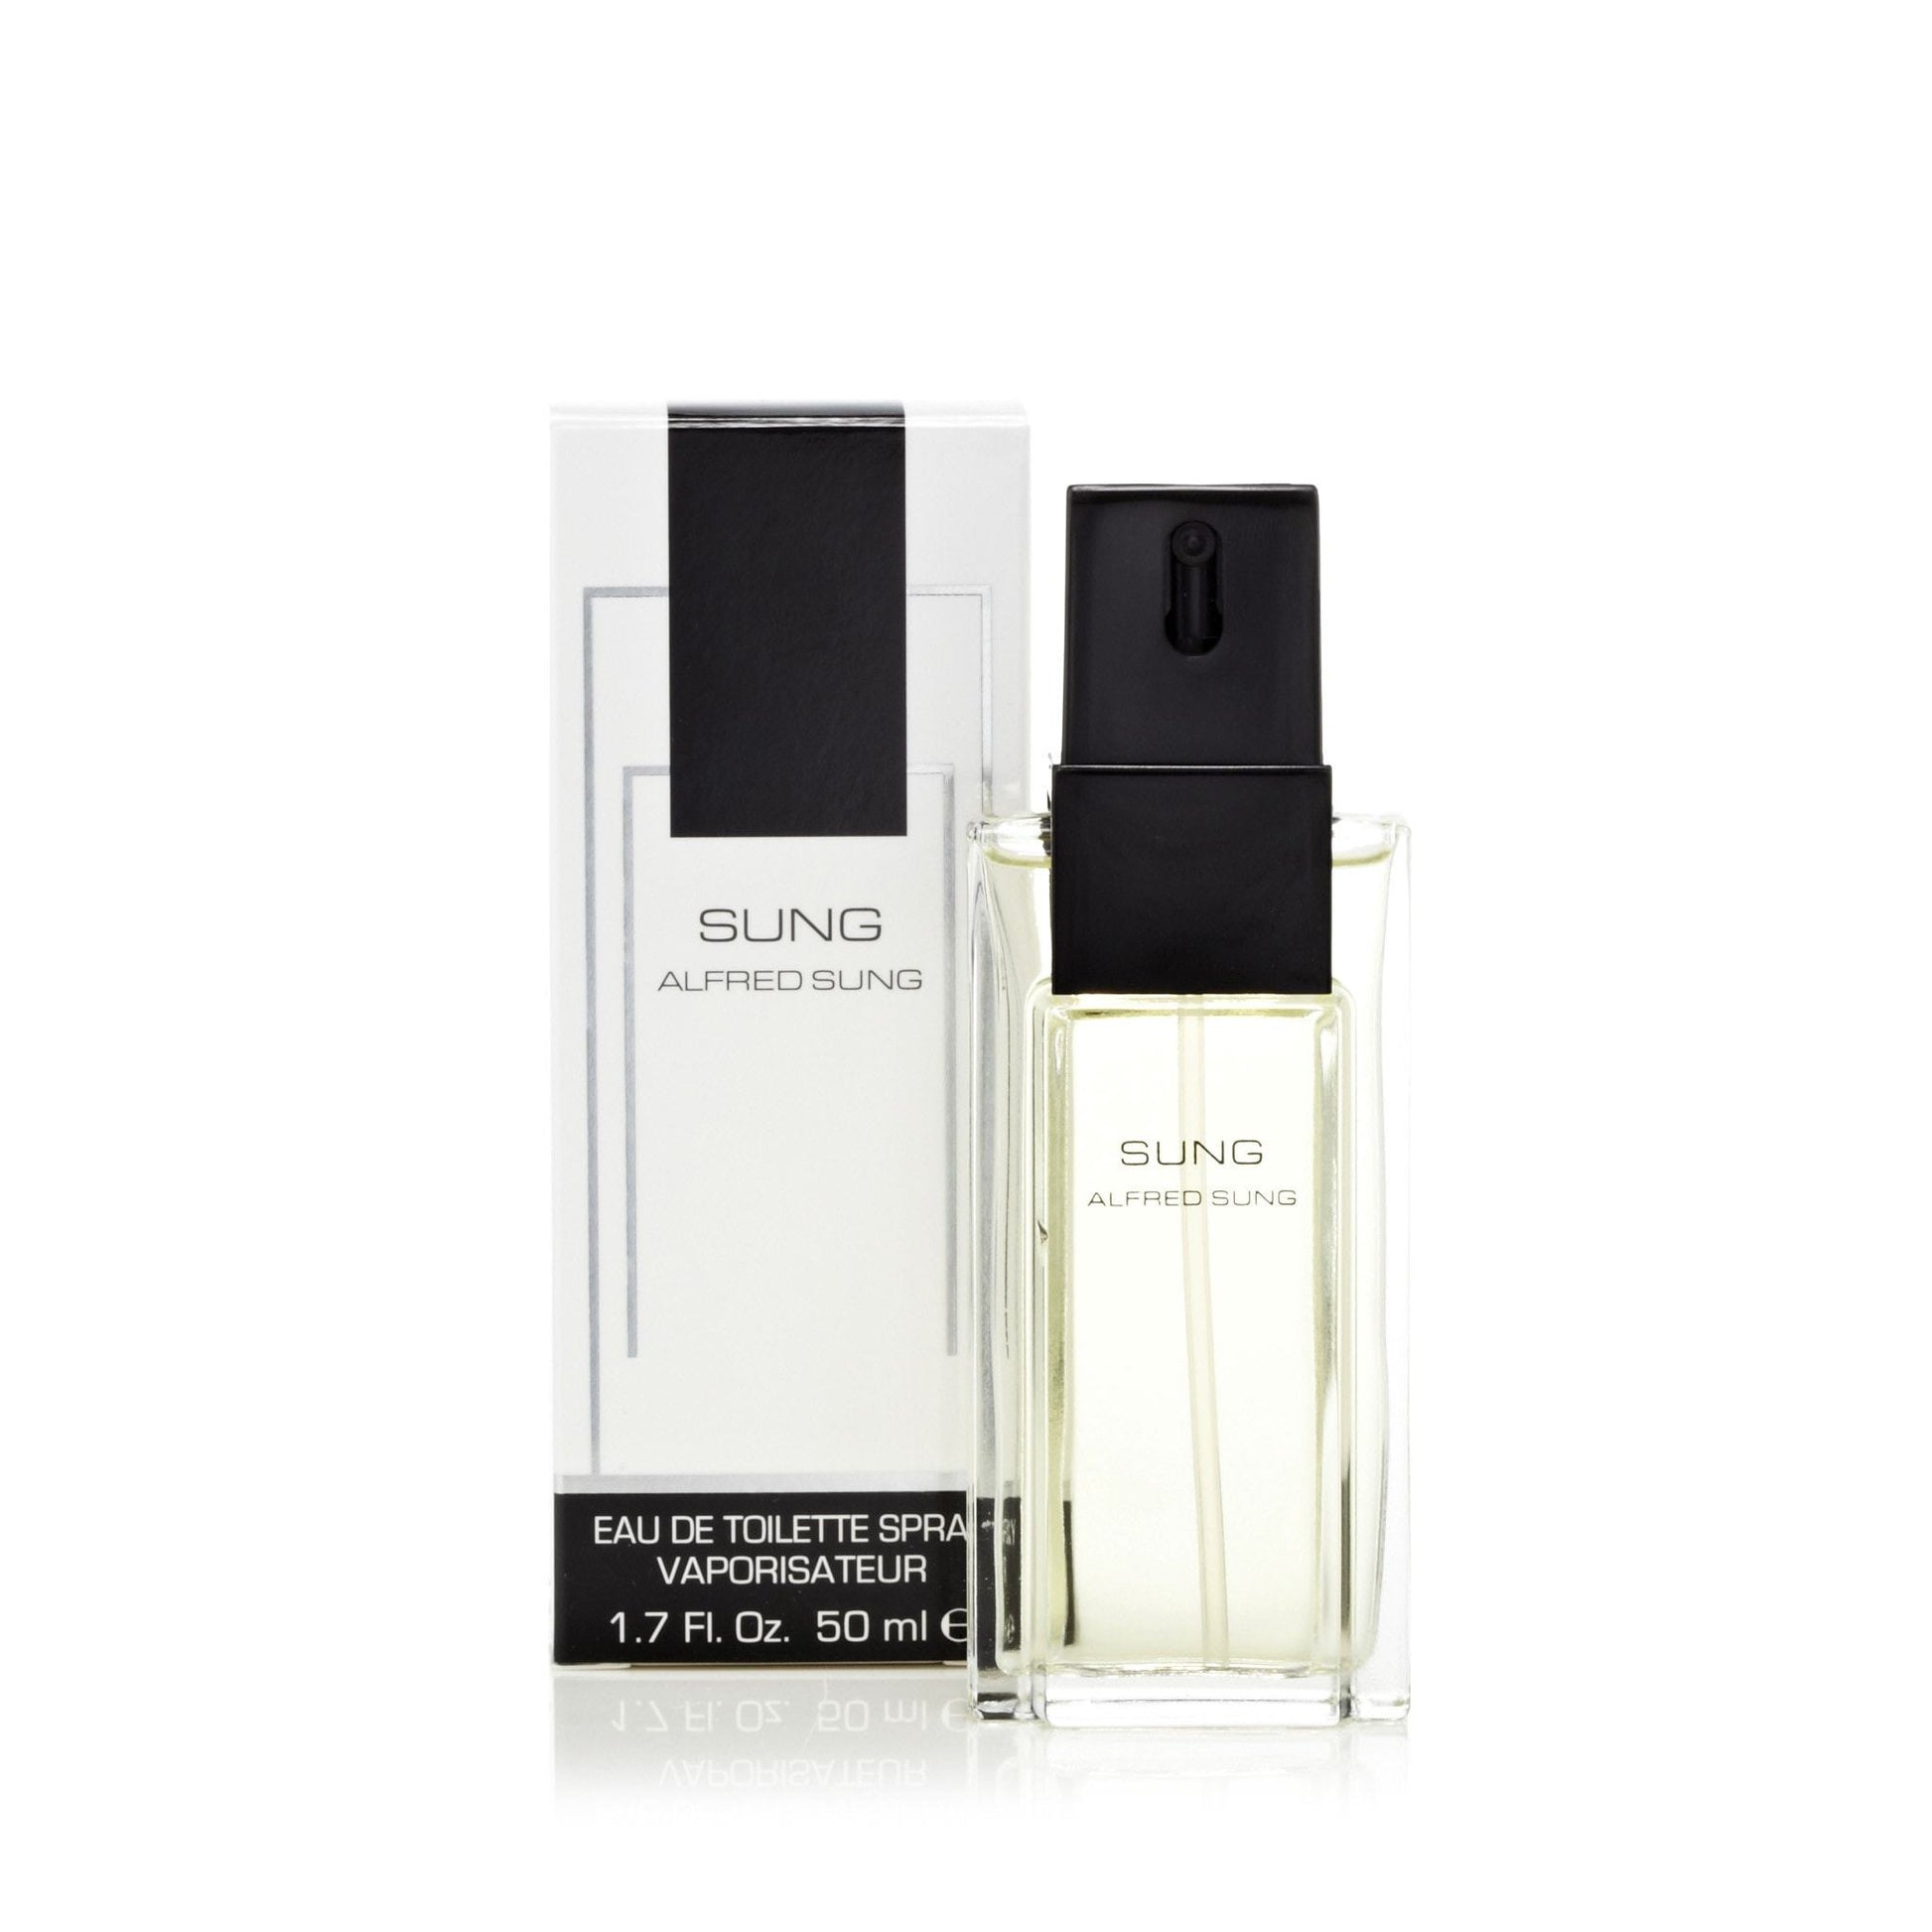 Alfred Sung Eau de Toilette Spray for Women by Alfred Sung, Product image 6